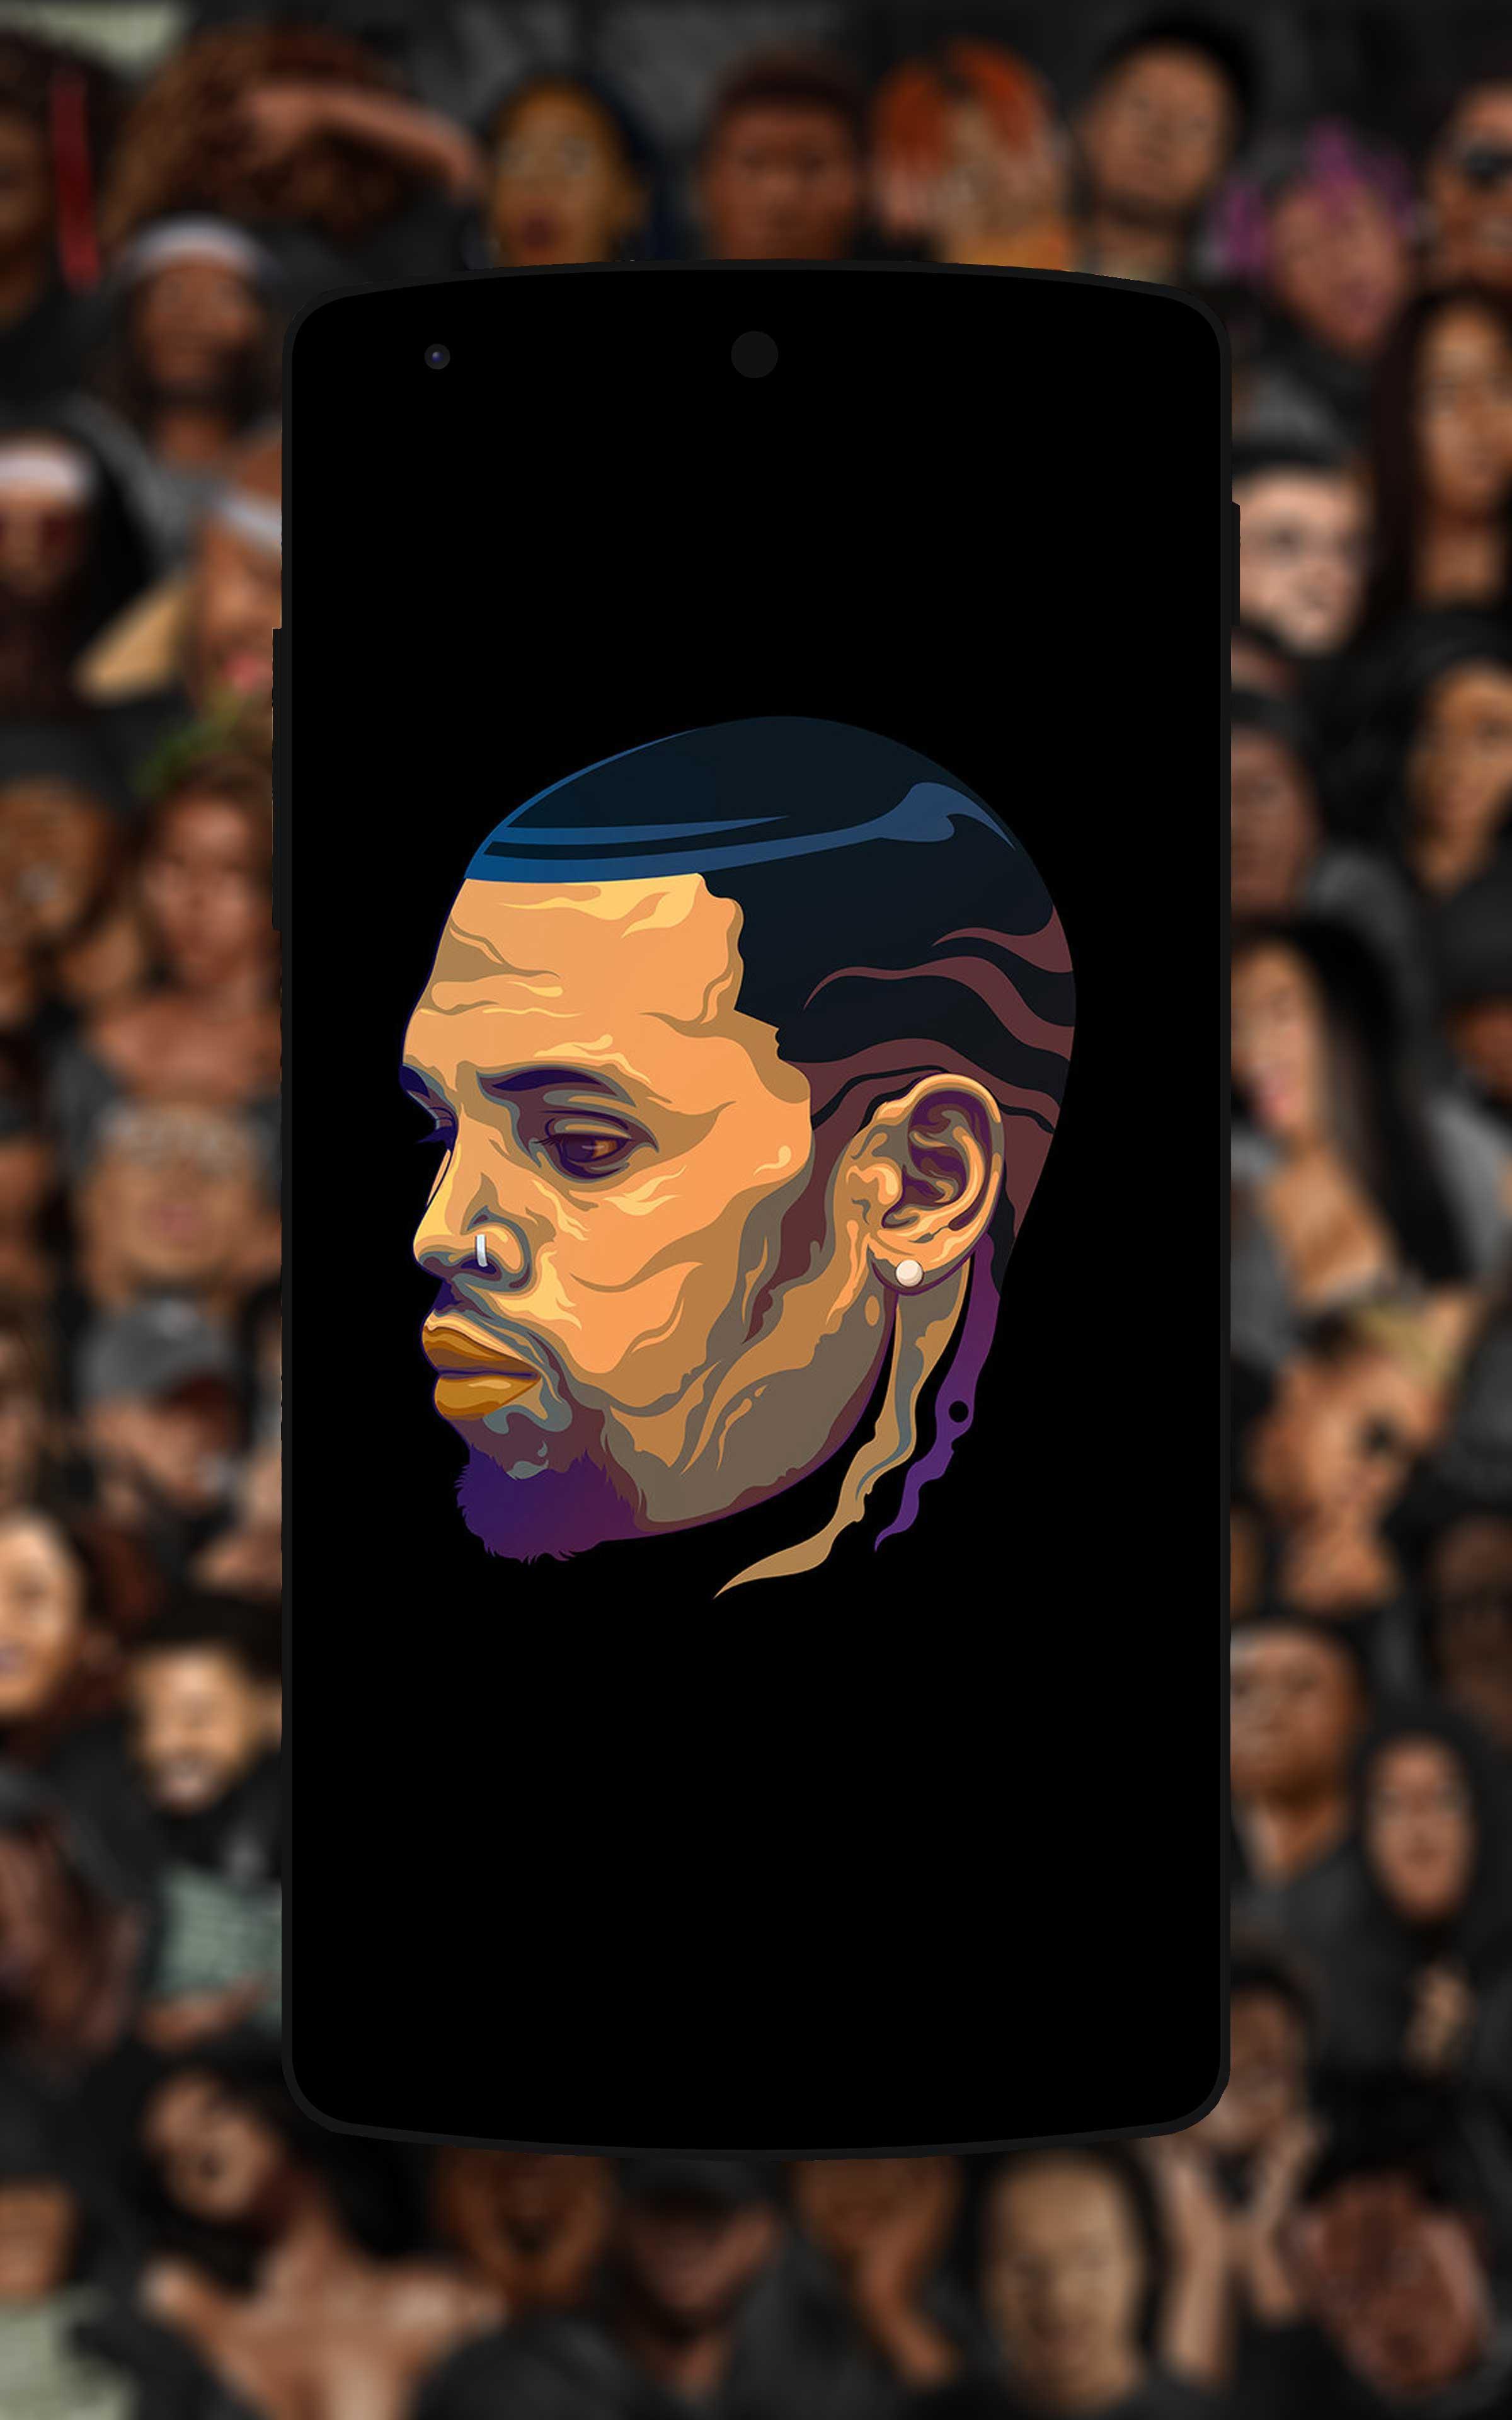 Chris Brown Singer Wallpaper for Android